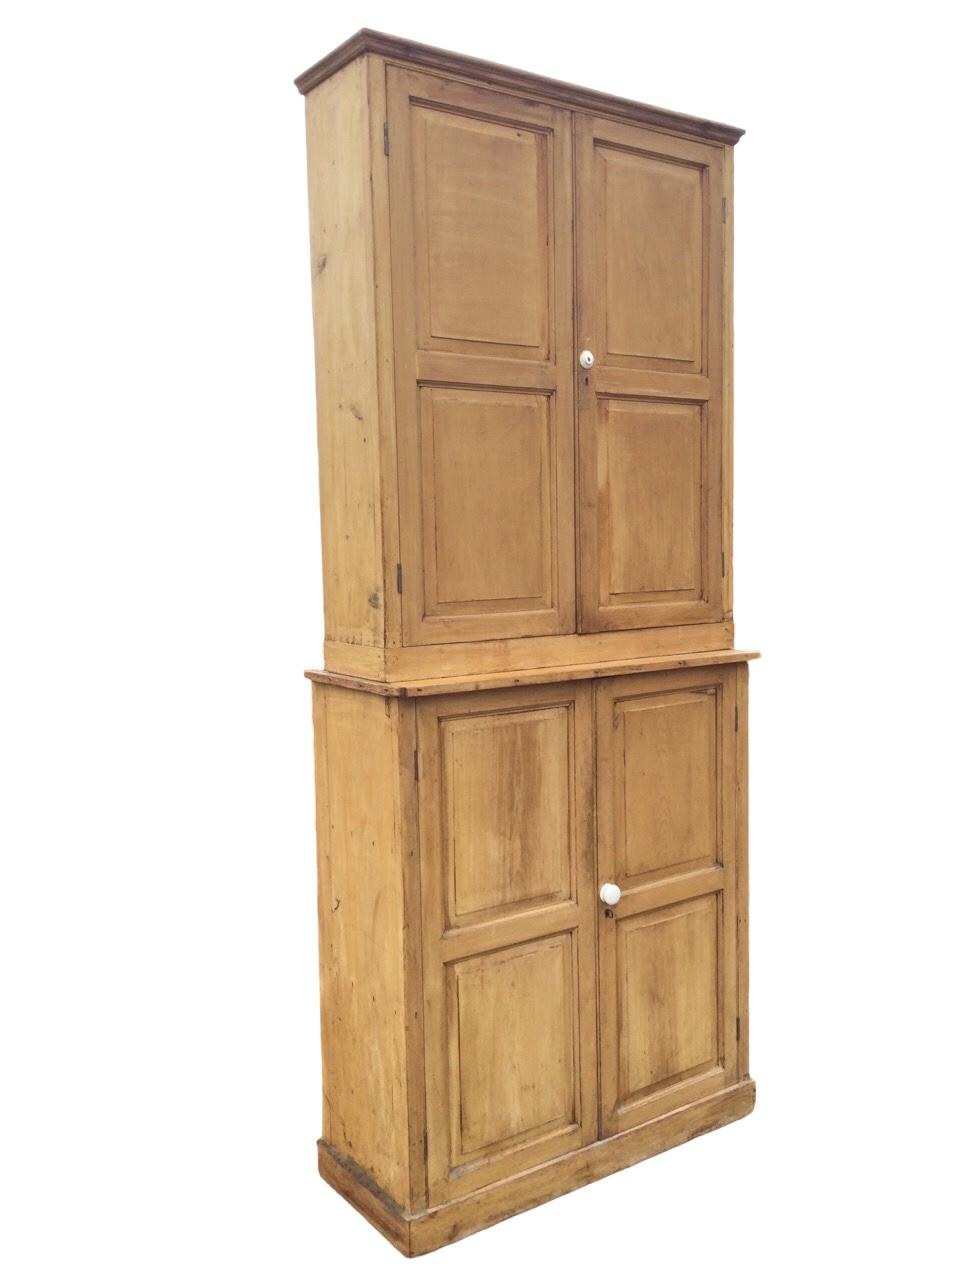 Two Victorian pine cupboards married to make a tall cabinet, each piece with four fielded panelled